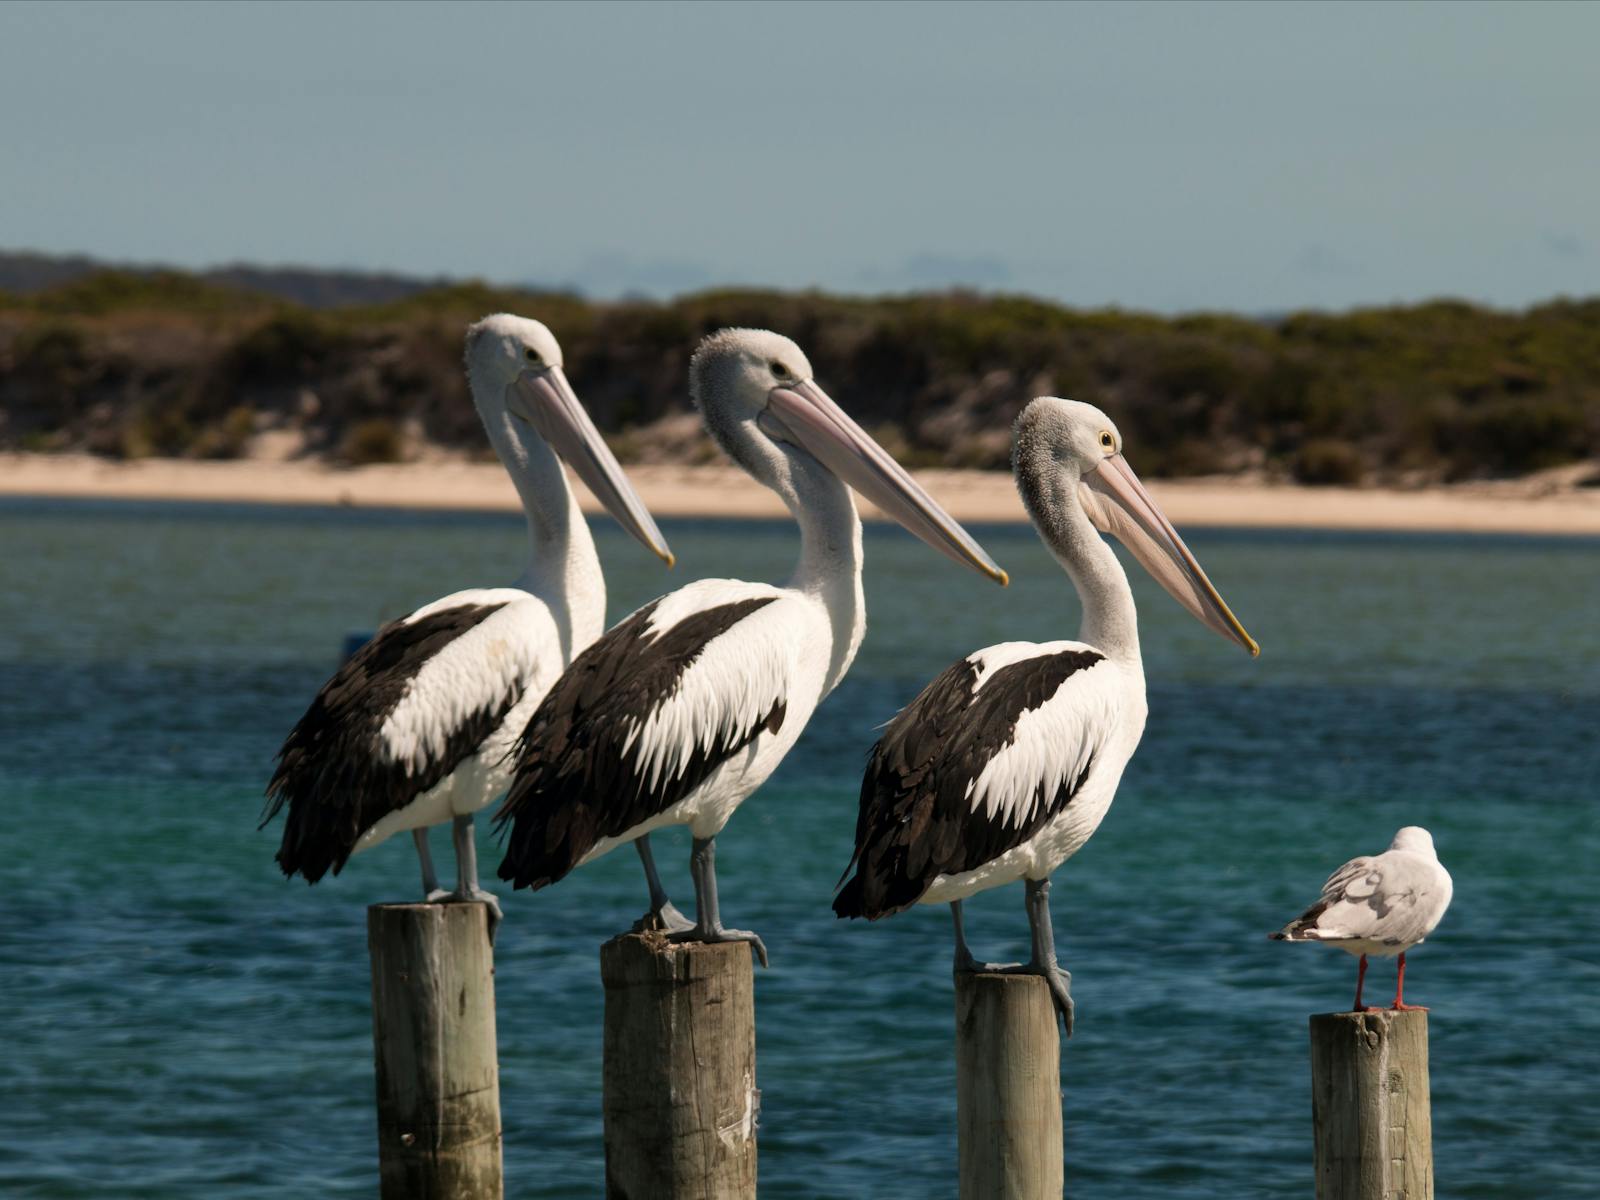 3 pelicans & 1 seagull on posts